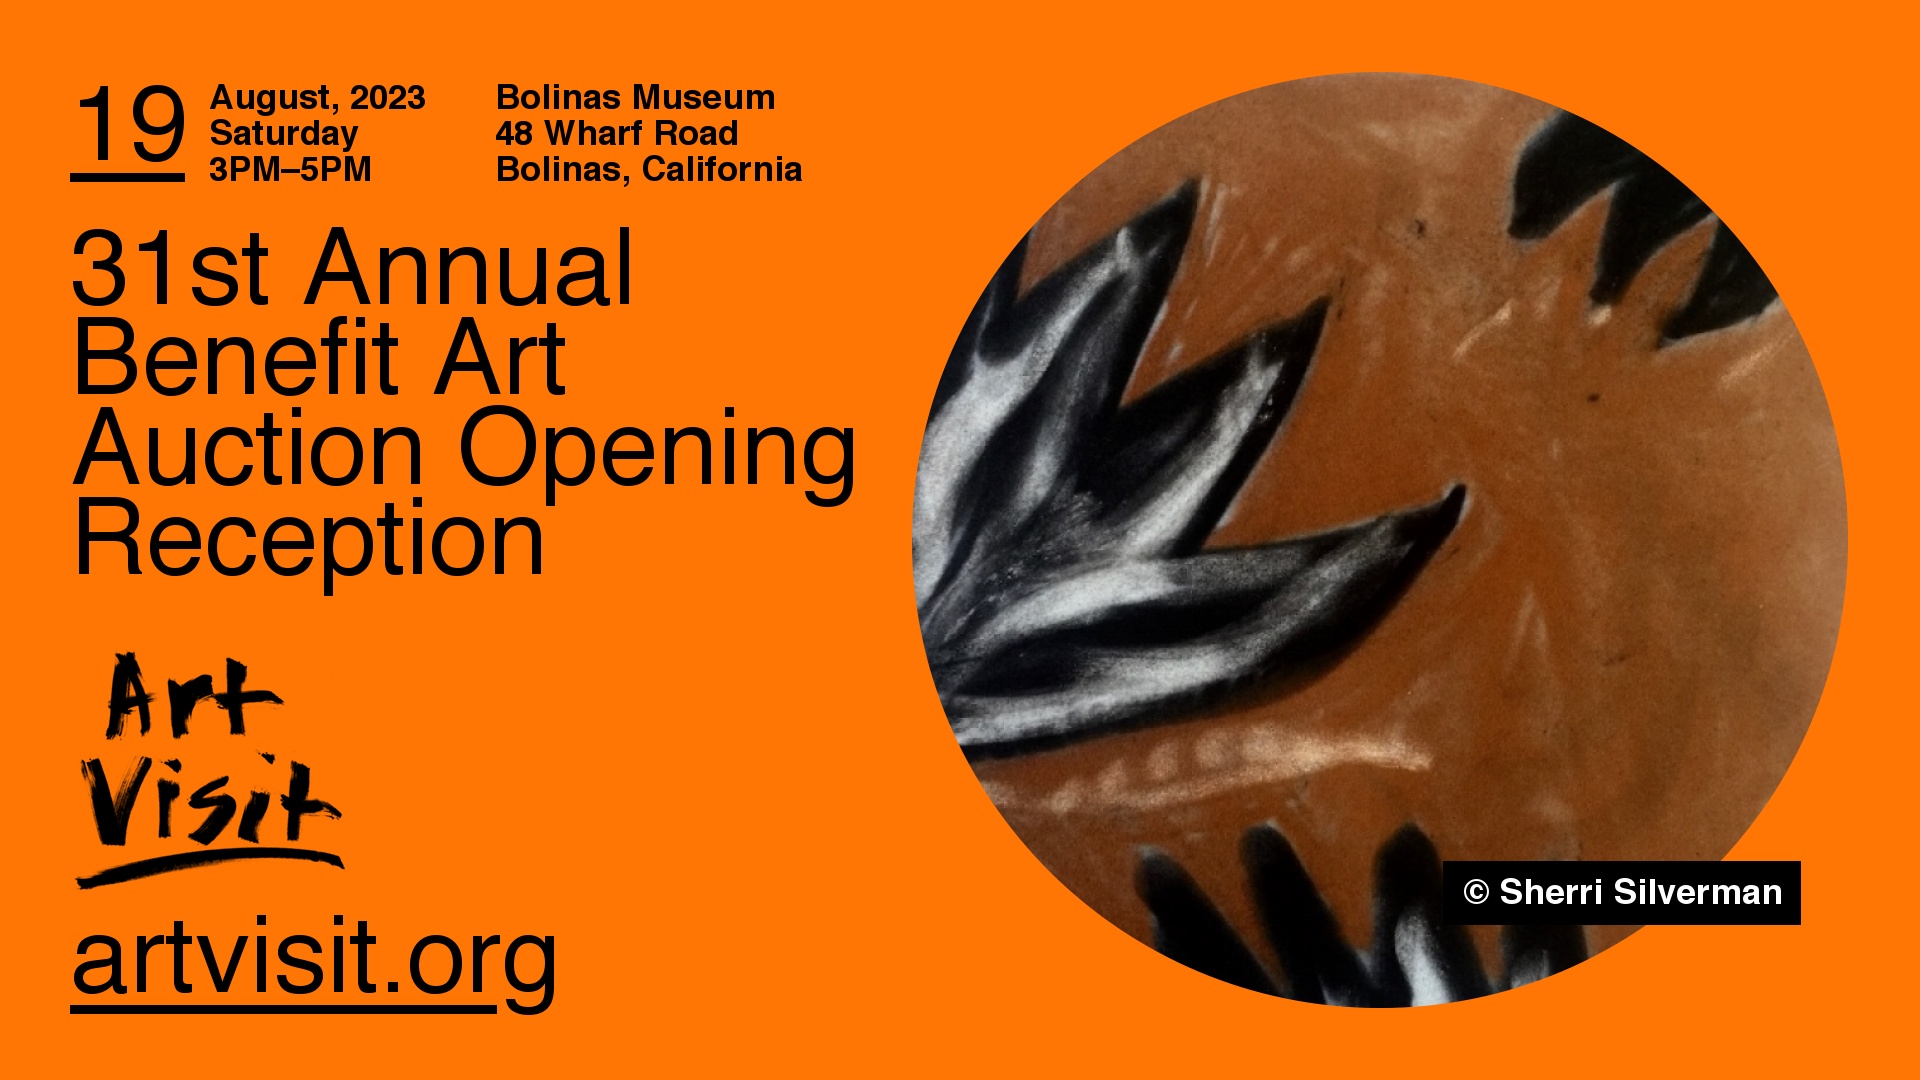 31st Annual Benefit Art Auction Opening Reception